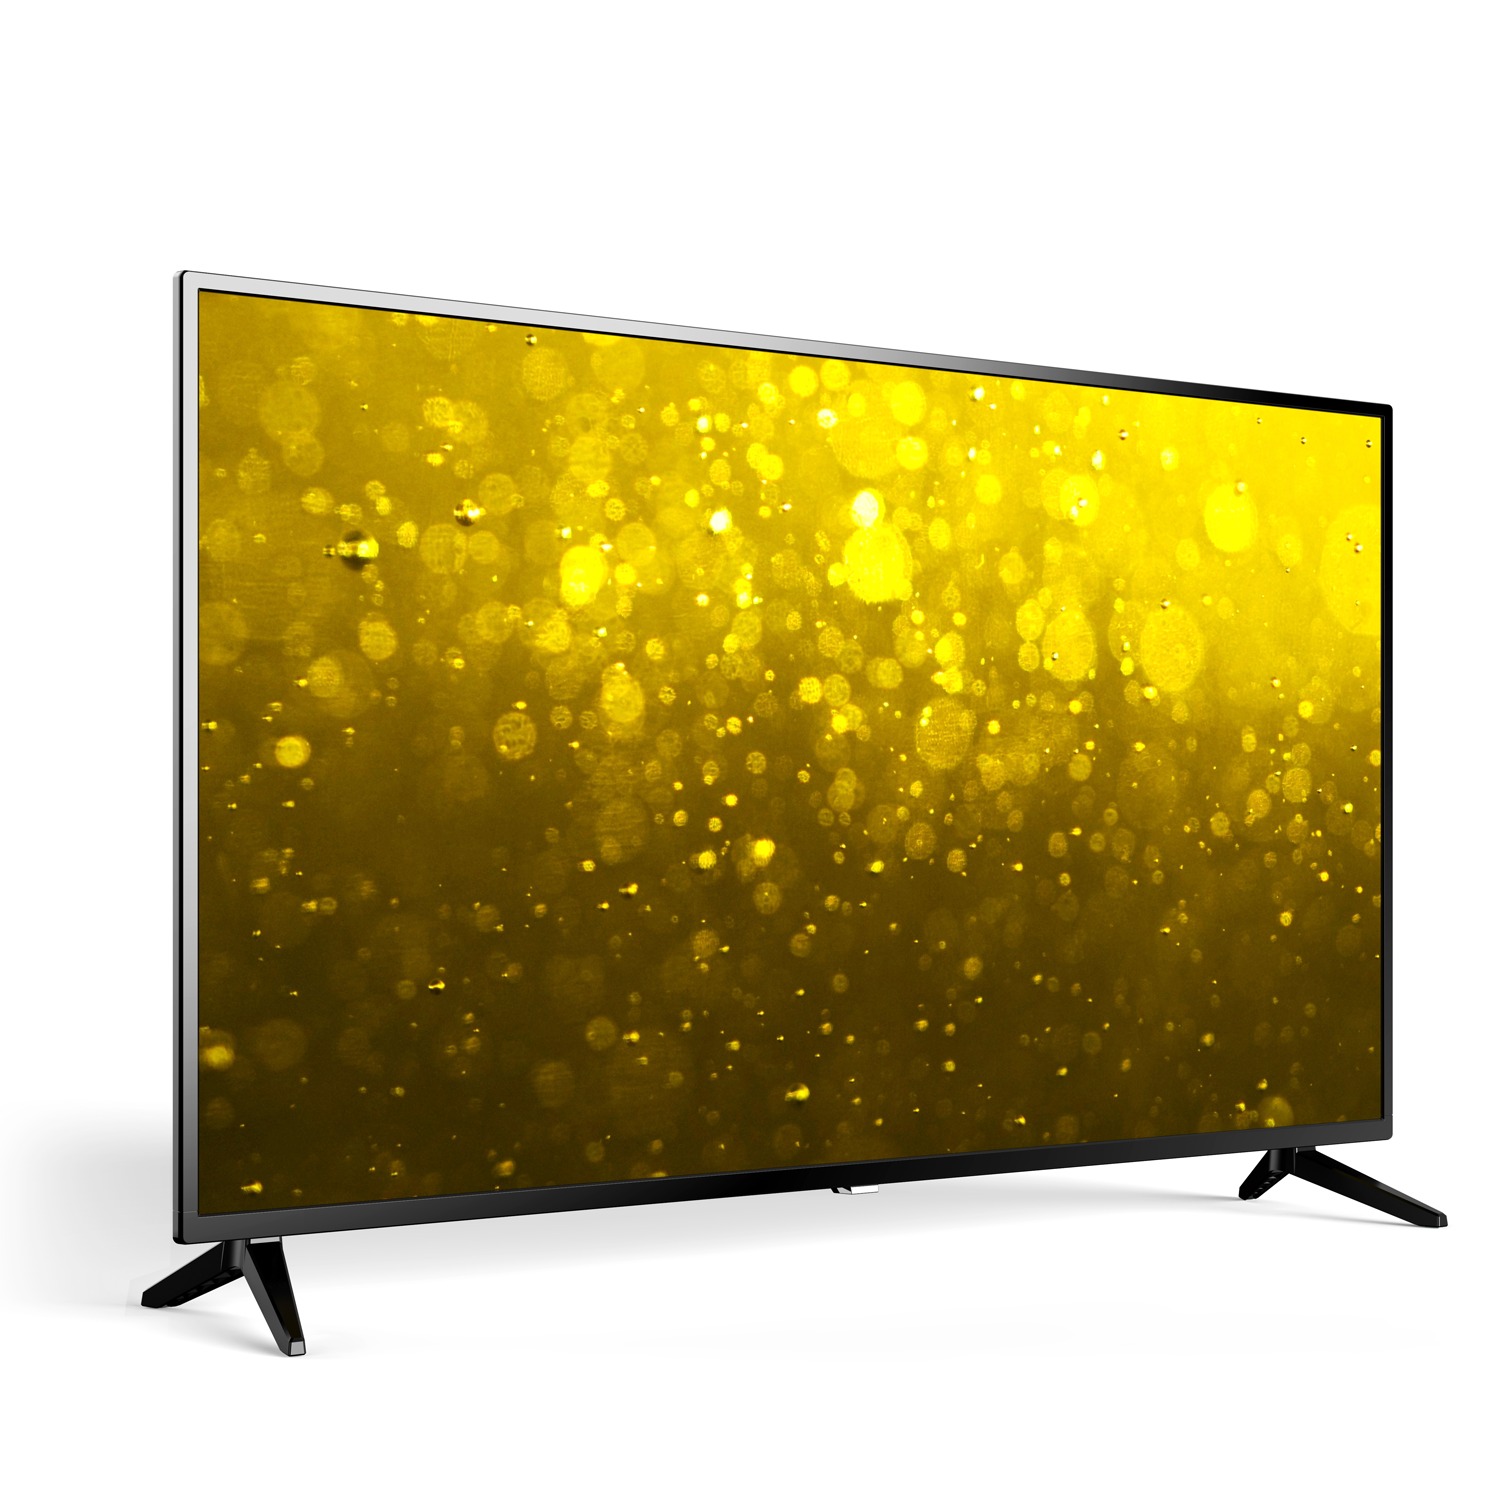 TV 32 Inches Normal From Unionaire LED – 32UW420 - Unionaire